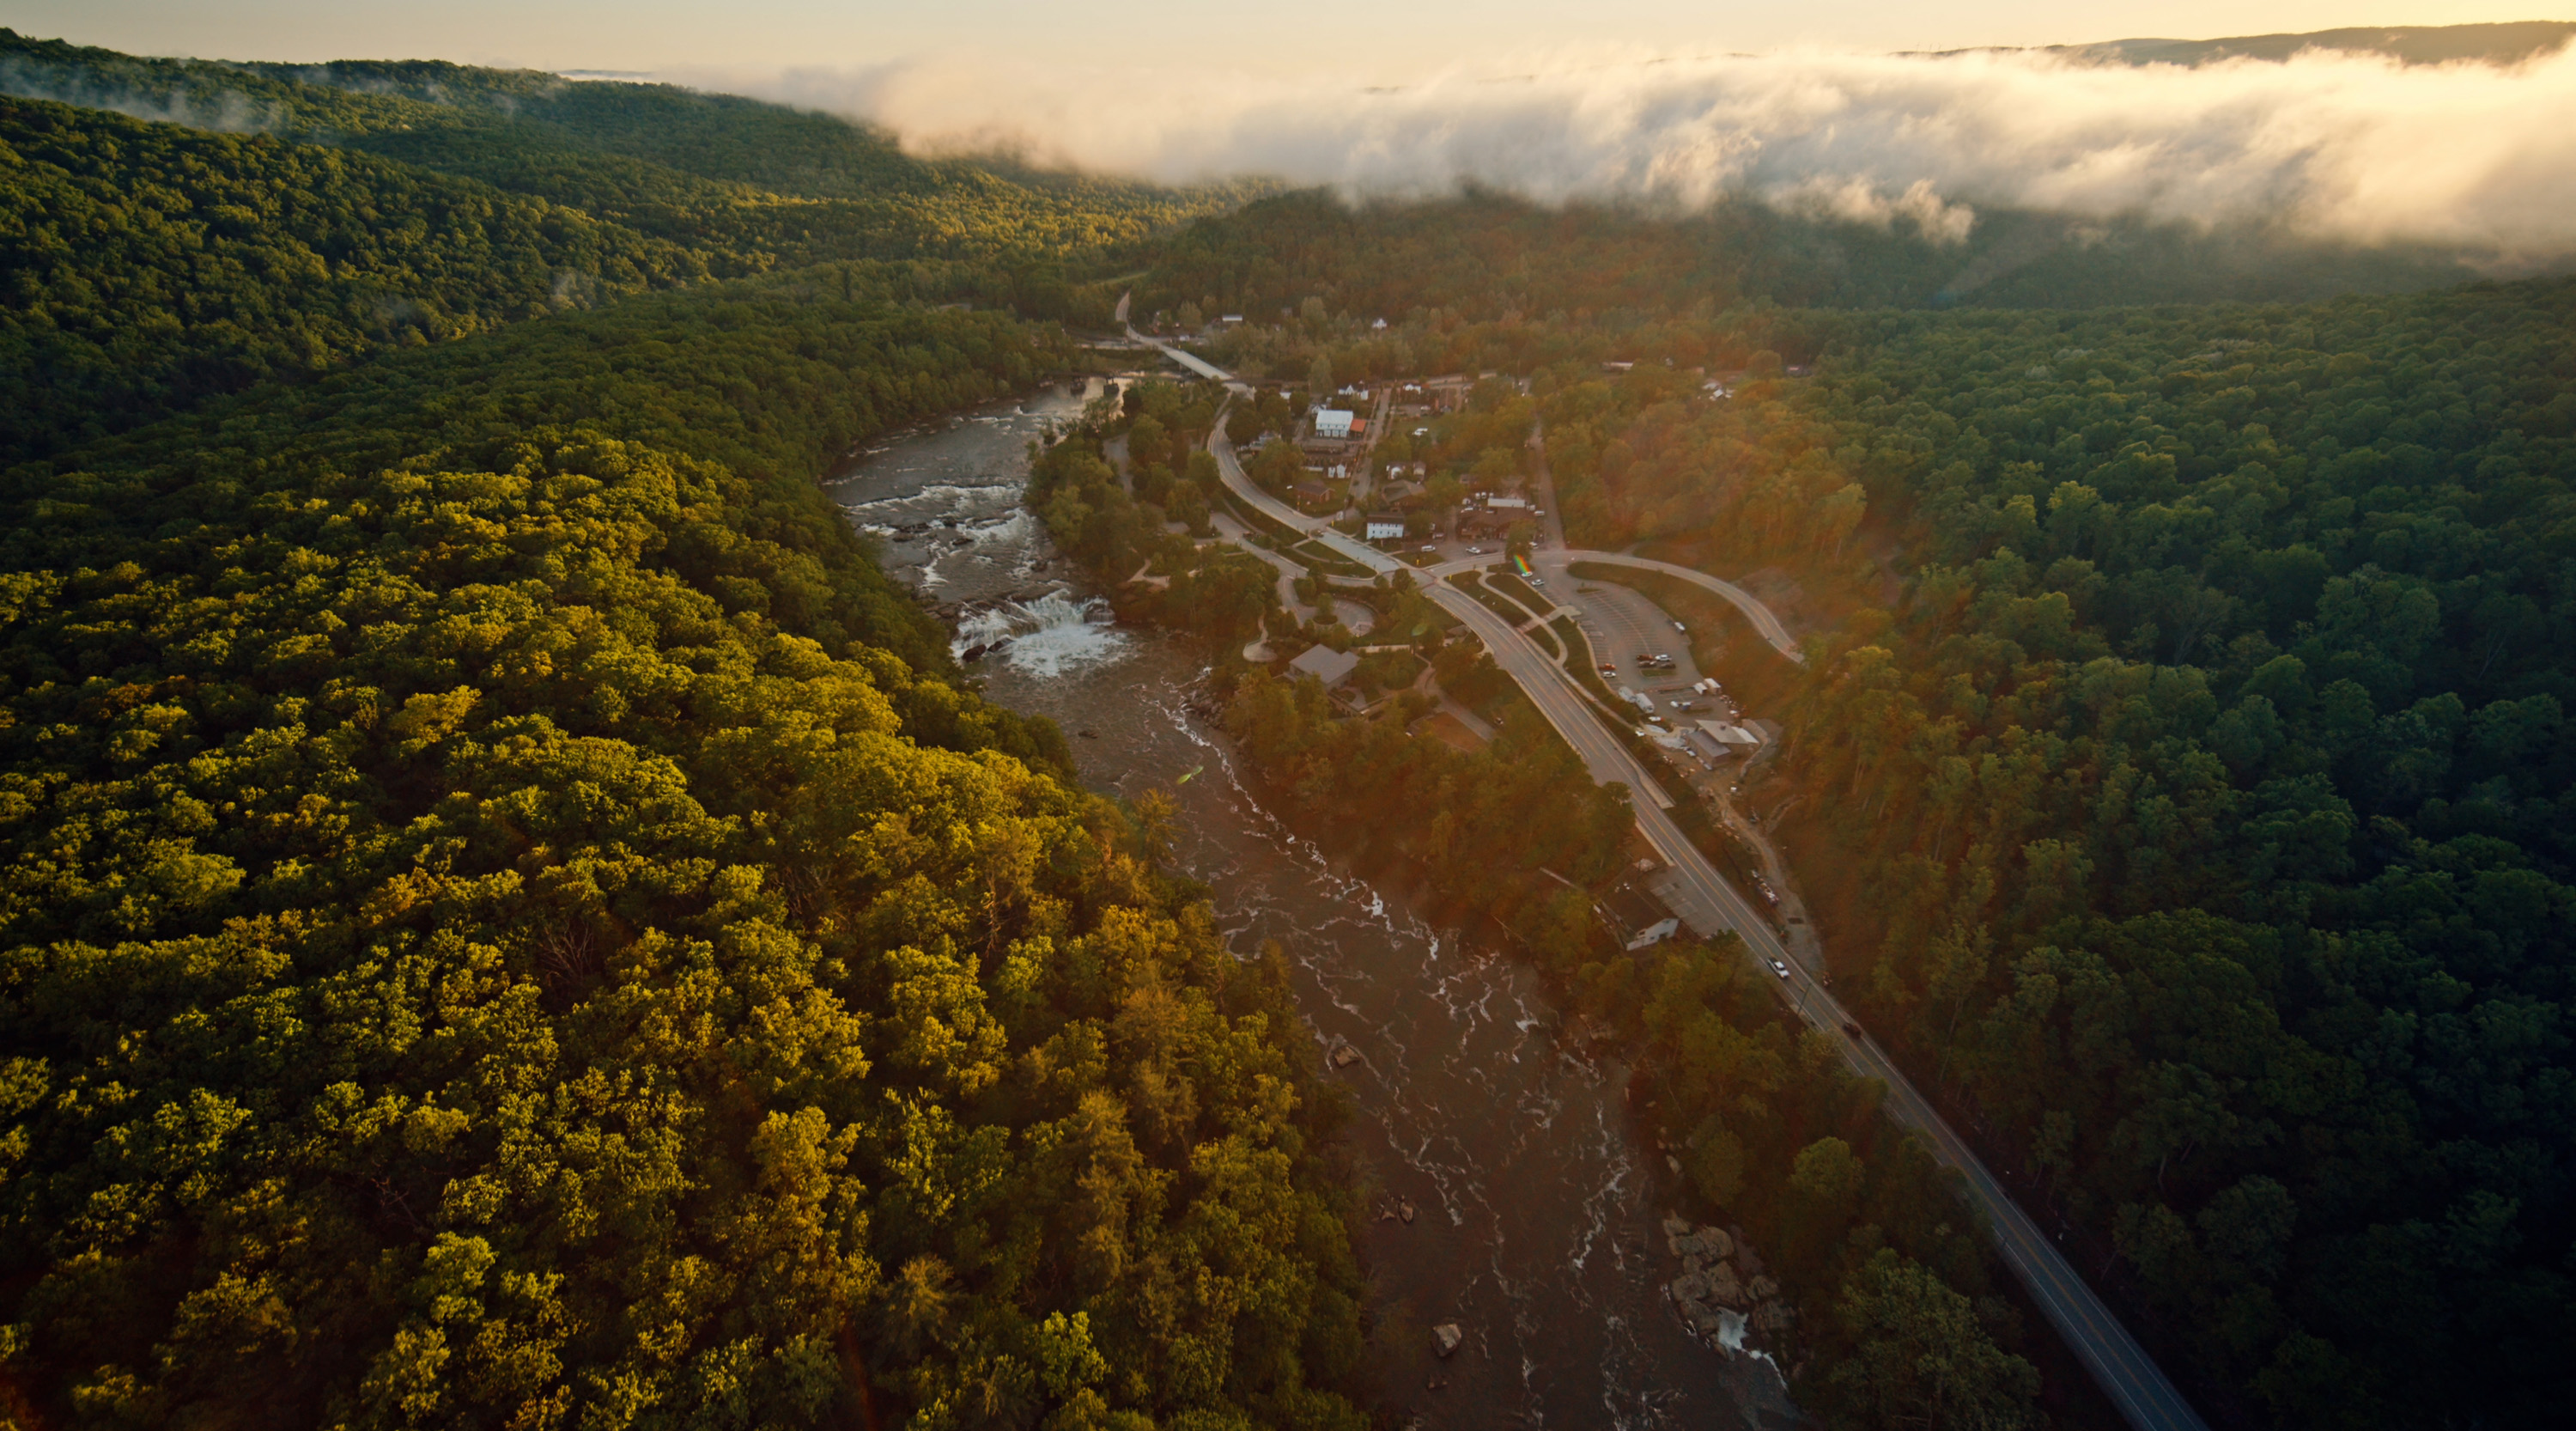 Aerial view of the town of Ohiopyle, Pennsylvania